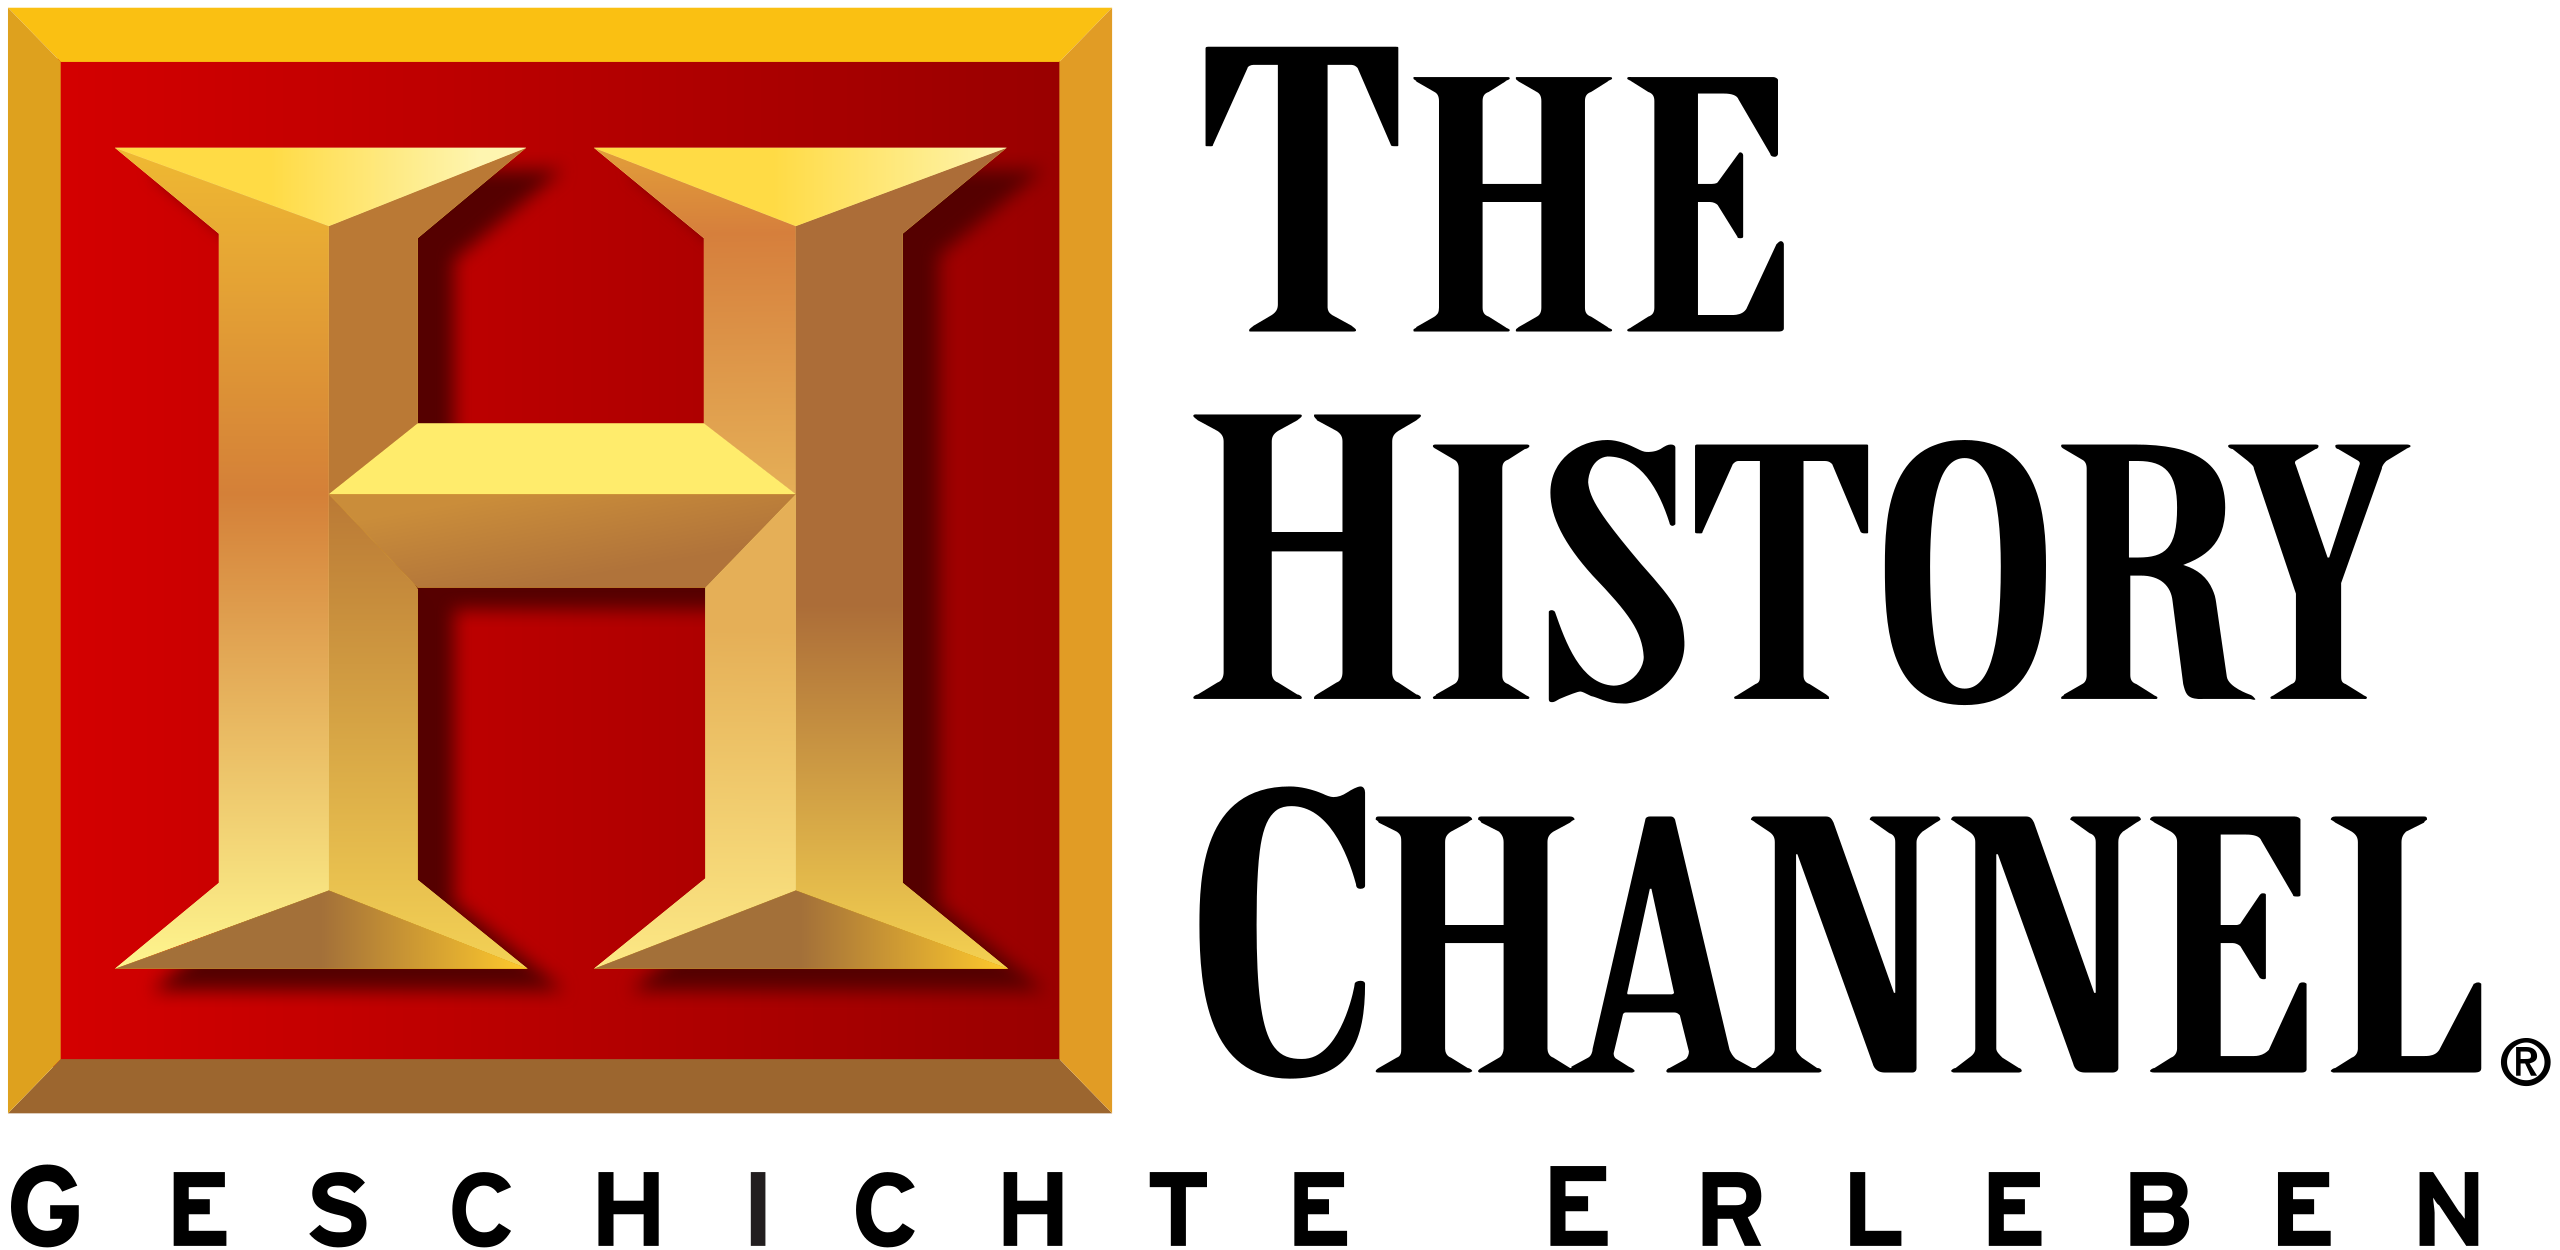 File:The History Channel-Logo.svg - Wikimedia Commons